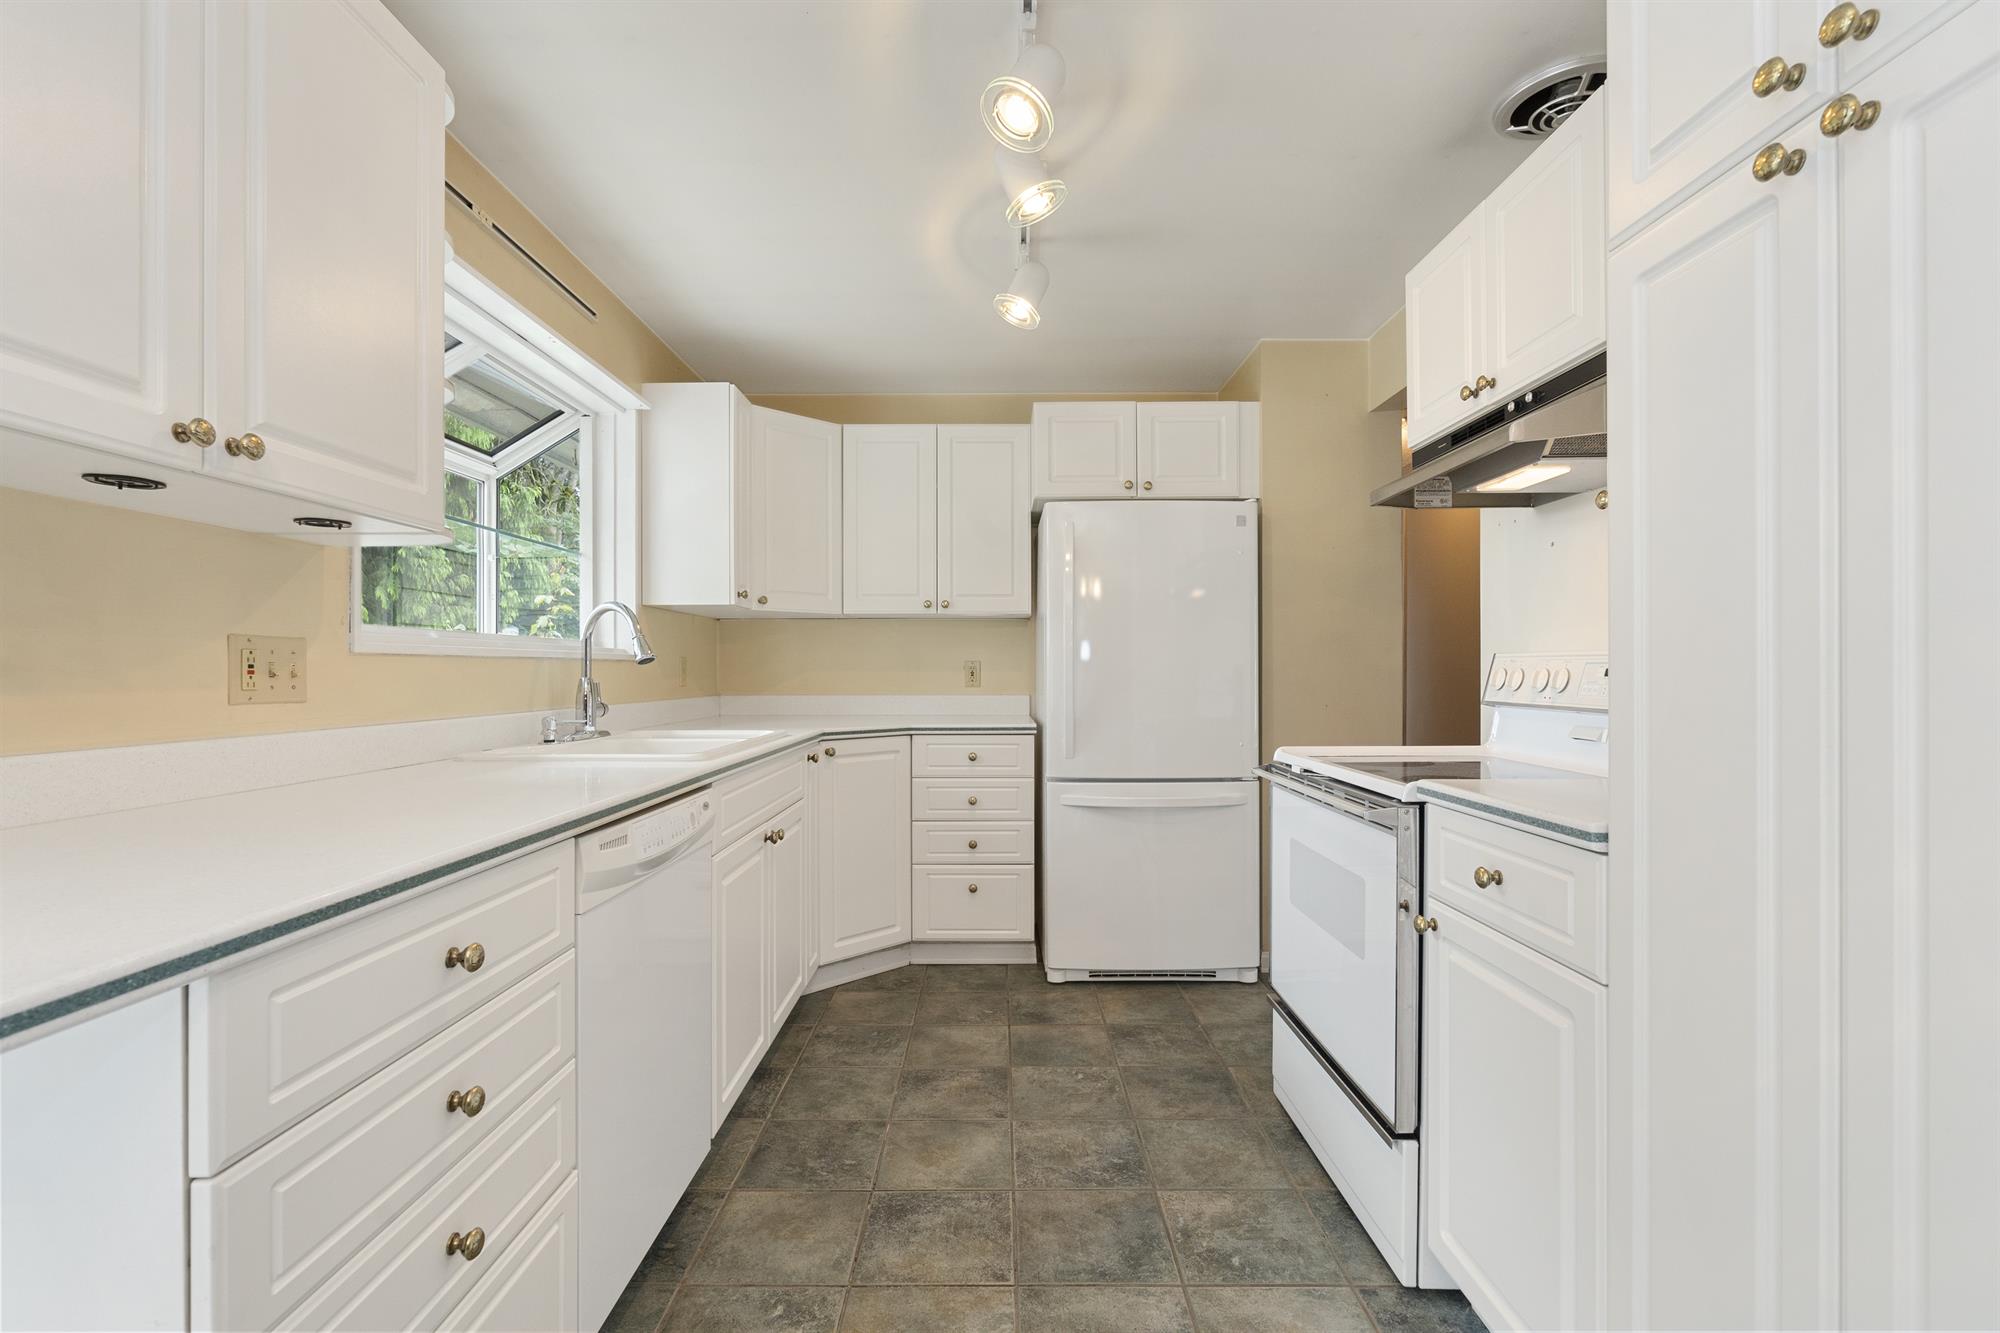 Newer appliances and Corian counters
